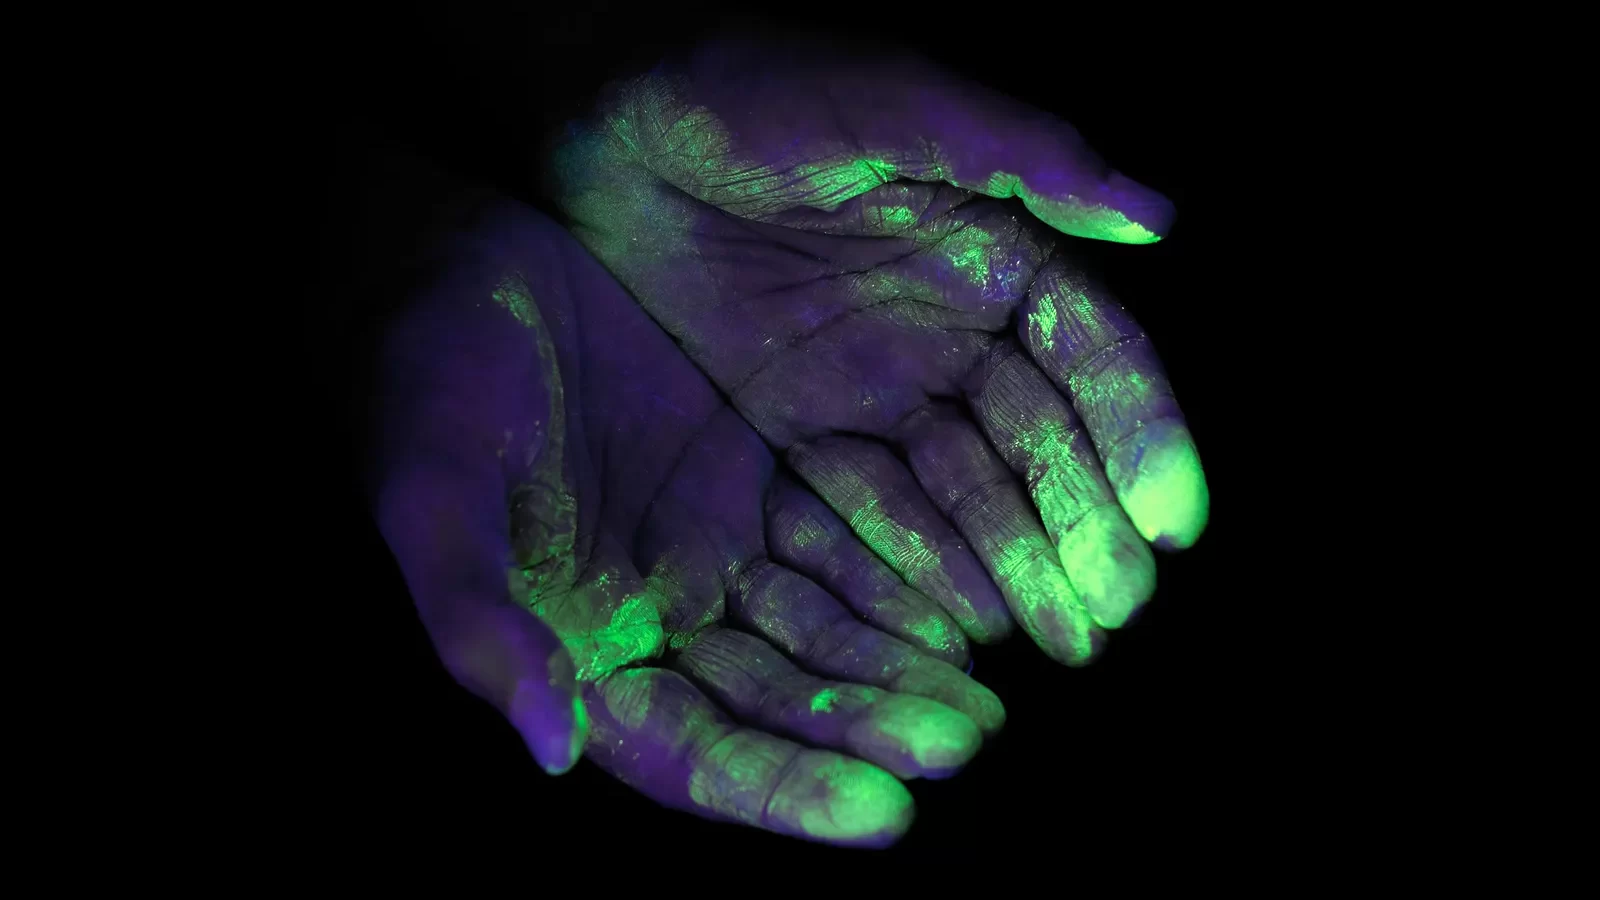 image of hands with uv light illuminating the germs on the hands